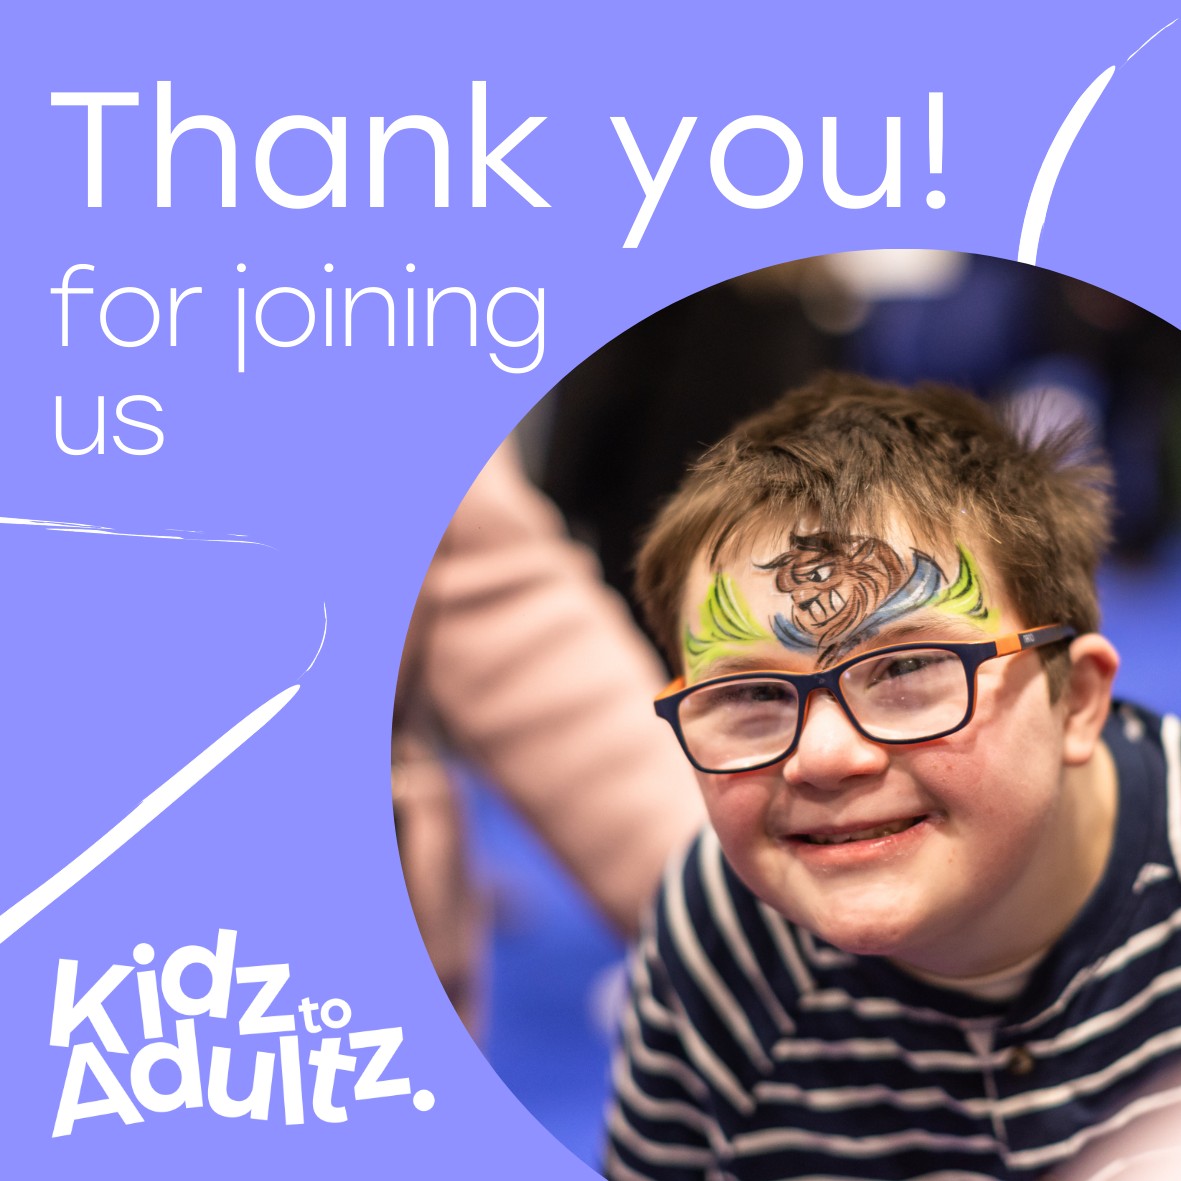 Thank you so much to everyone who attended Kidz to Adultz South today! We hope you enjoyed your day as much as the team did and we look forward to seeing you again next year! #kidztoadultz #exhibition #information #disabilities #farnborough